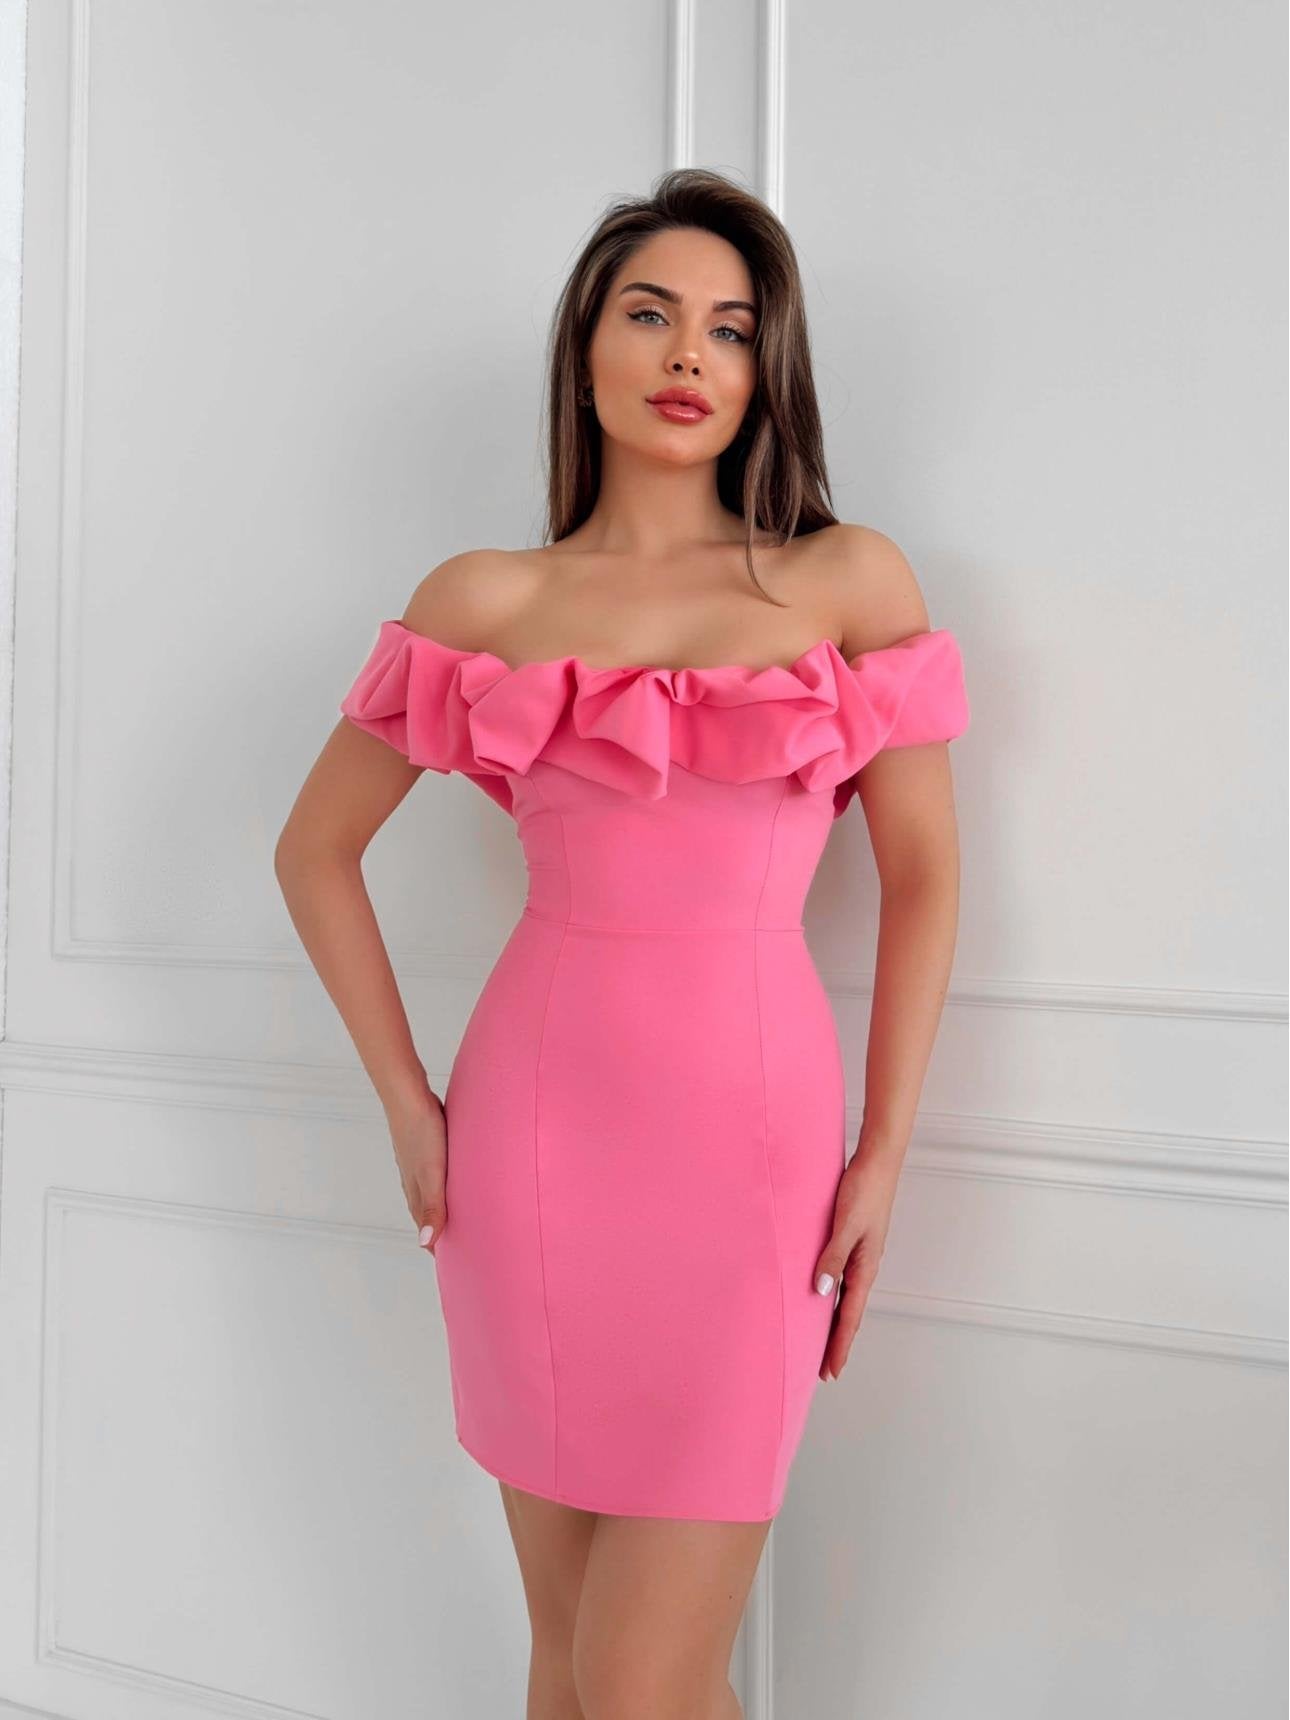 PINK COLLAR FRILLY FITTED MINI DRESS - Lebbse